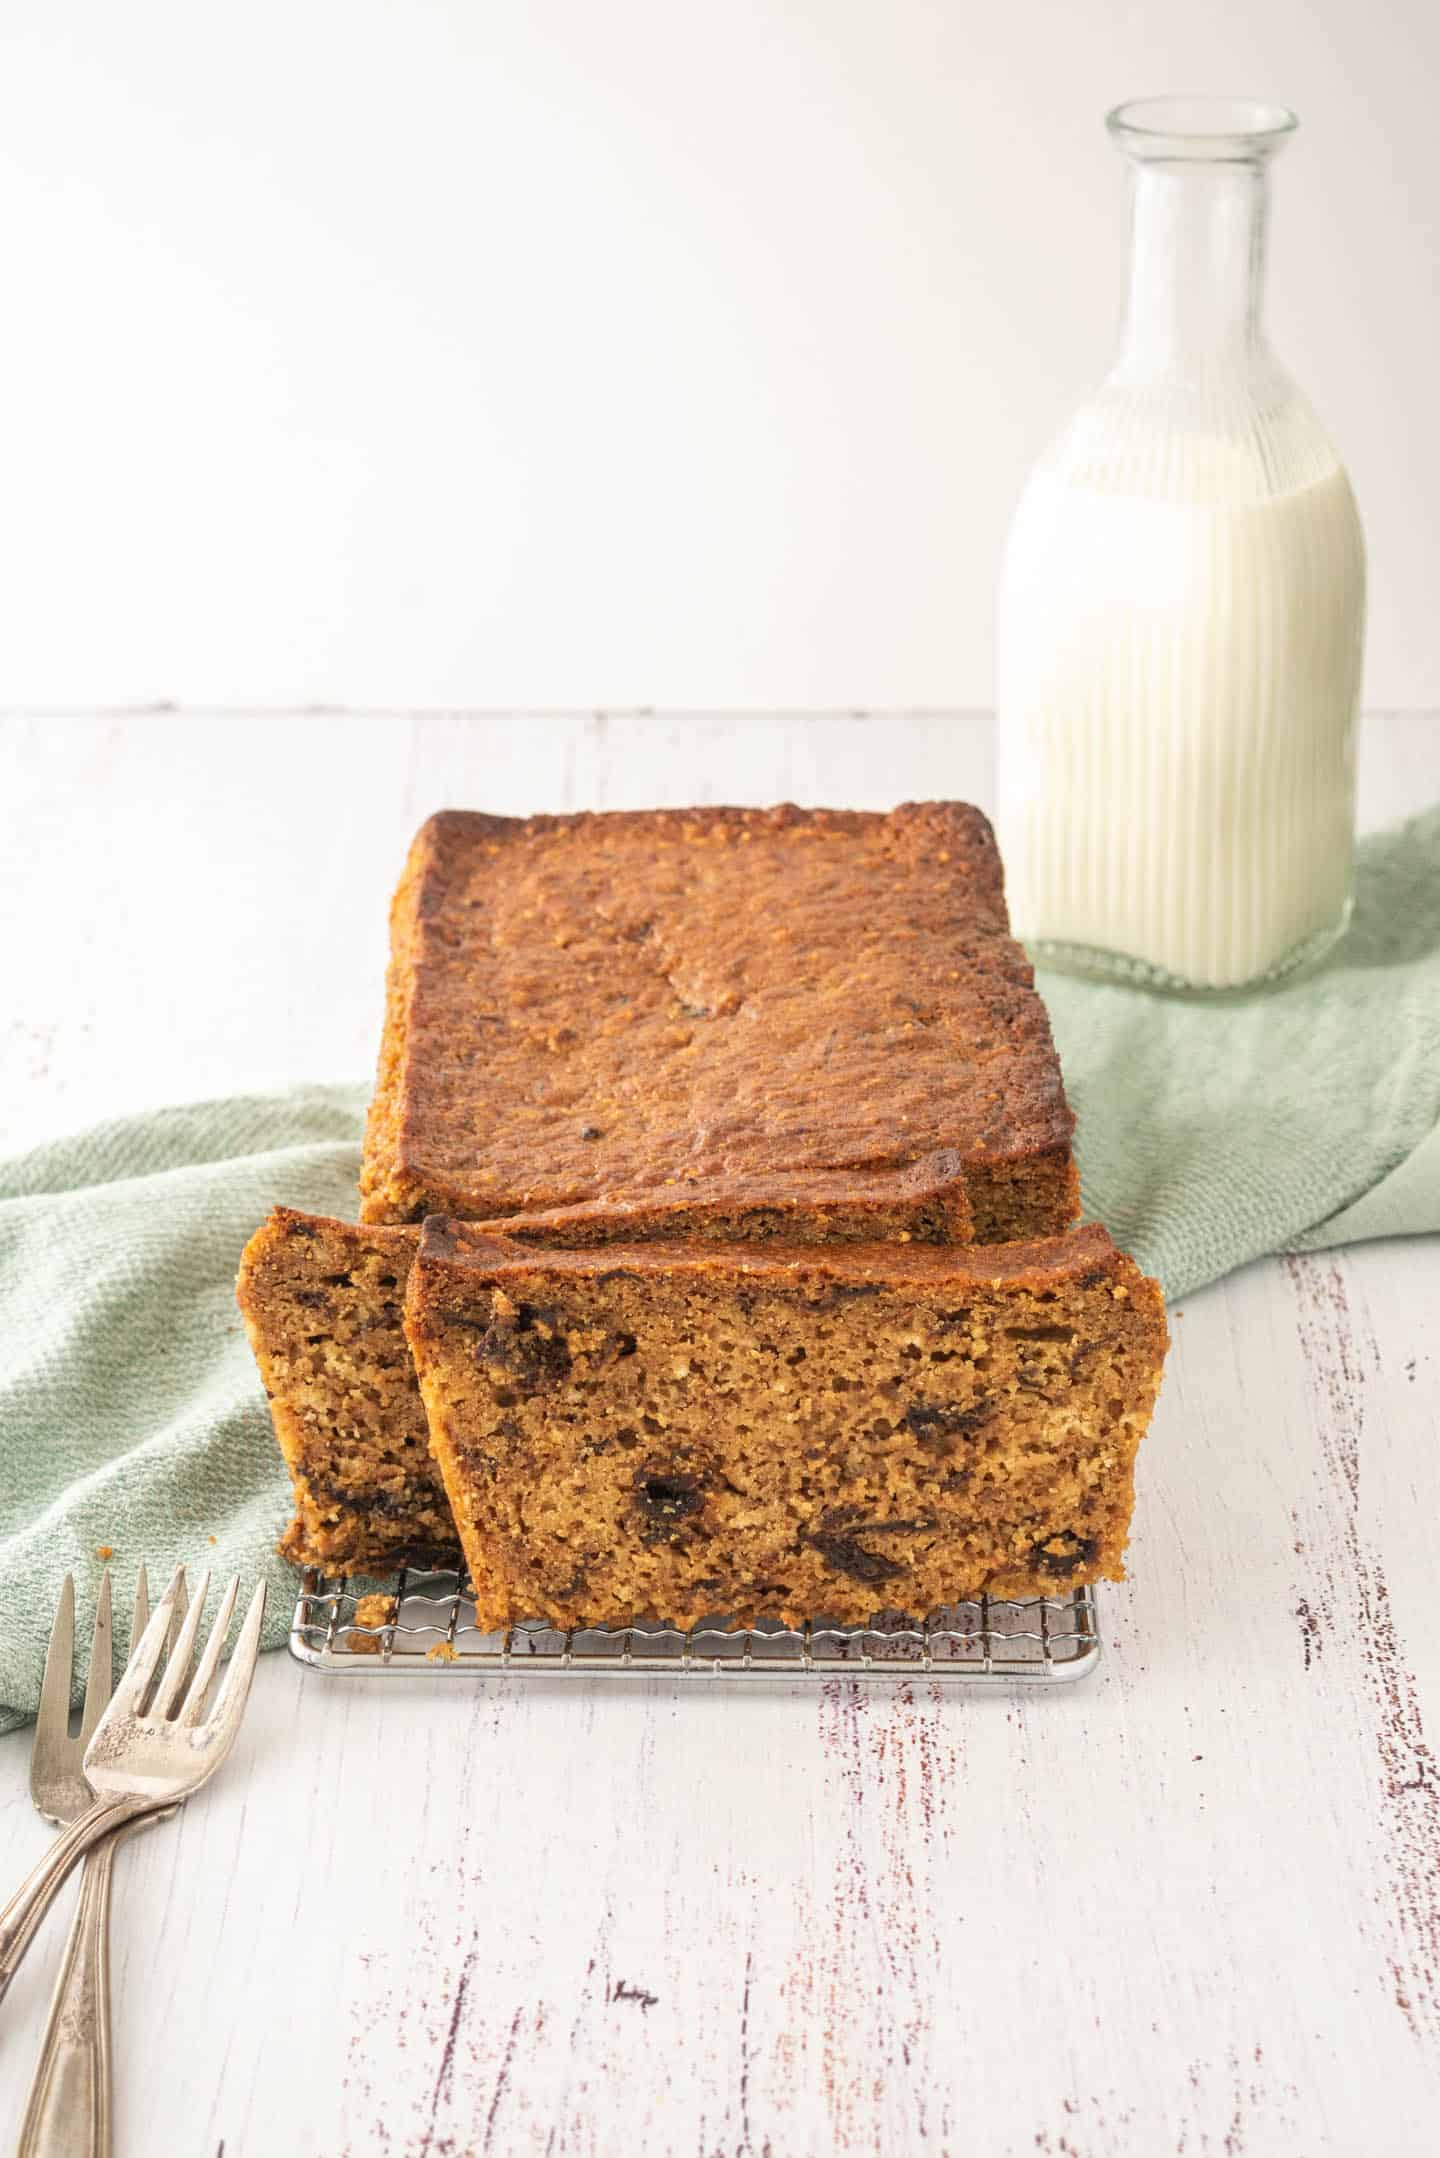 Whole prune cake with some slices on a cooling rack, a bottle of milk in the background and two forks in the left bottom corner